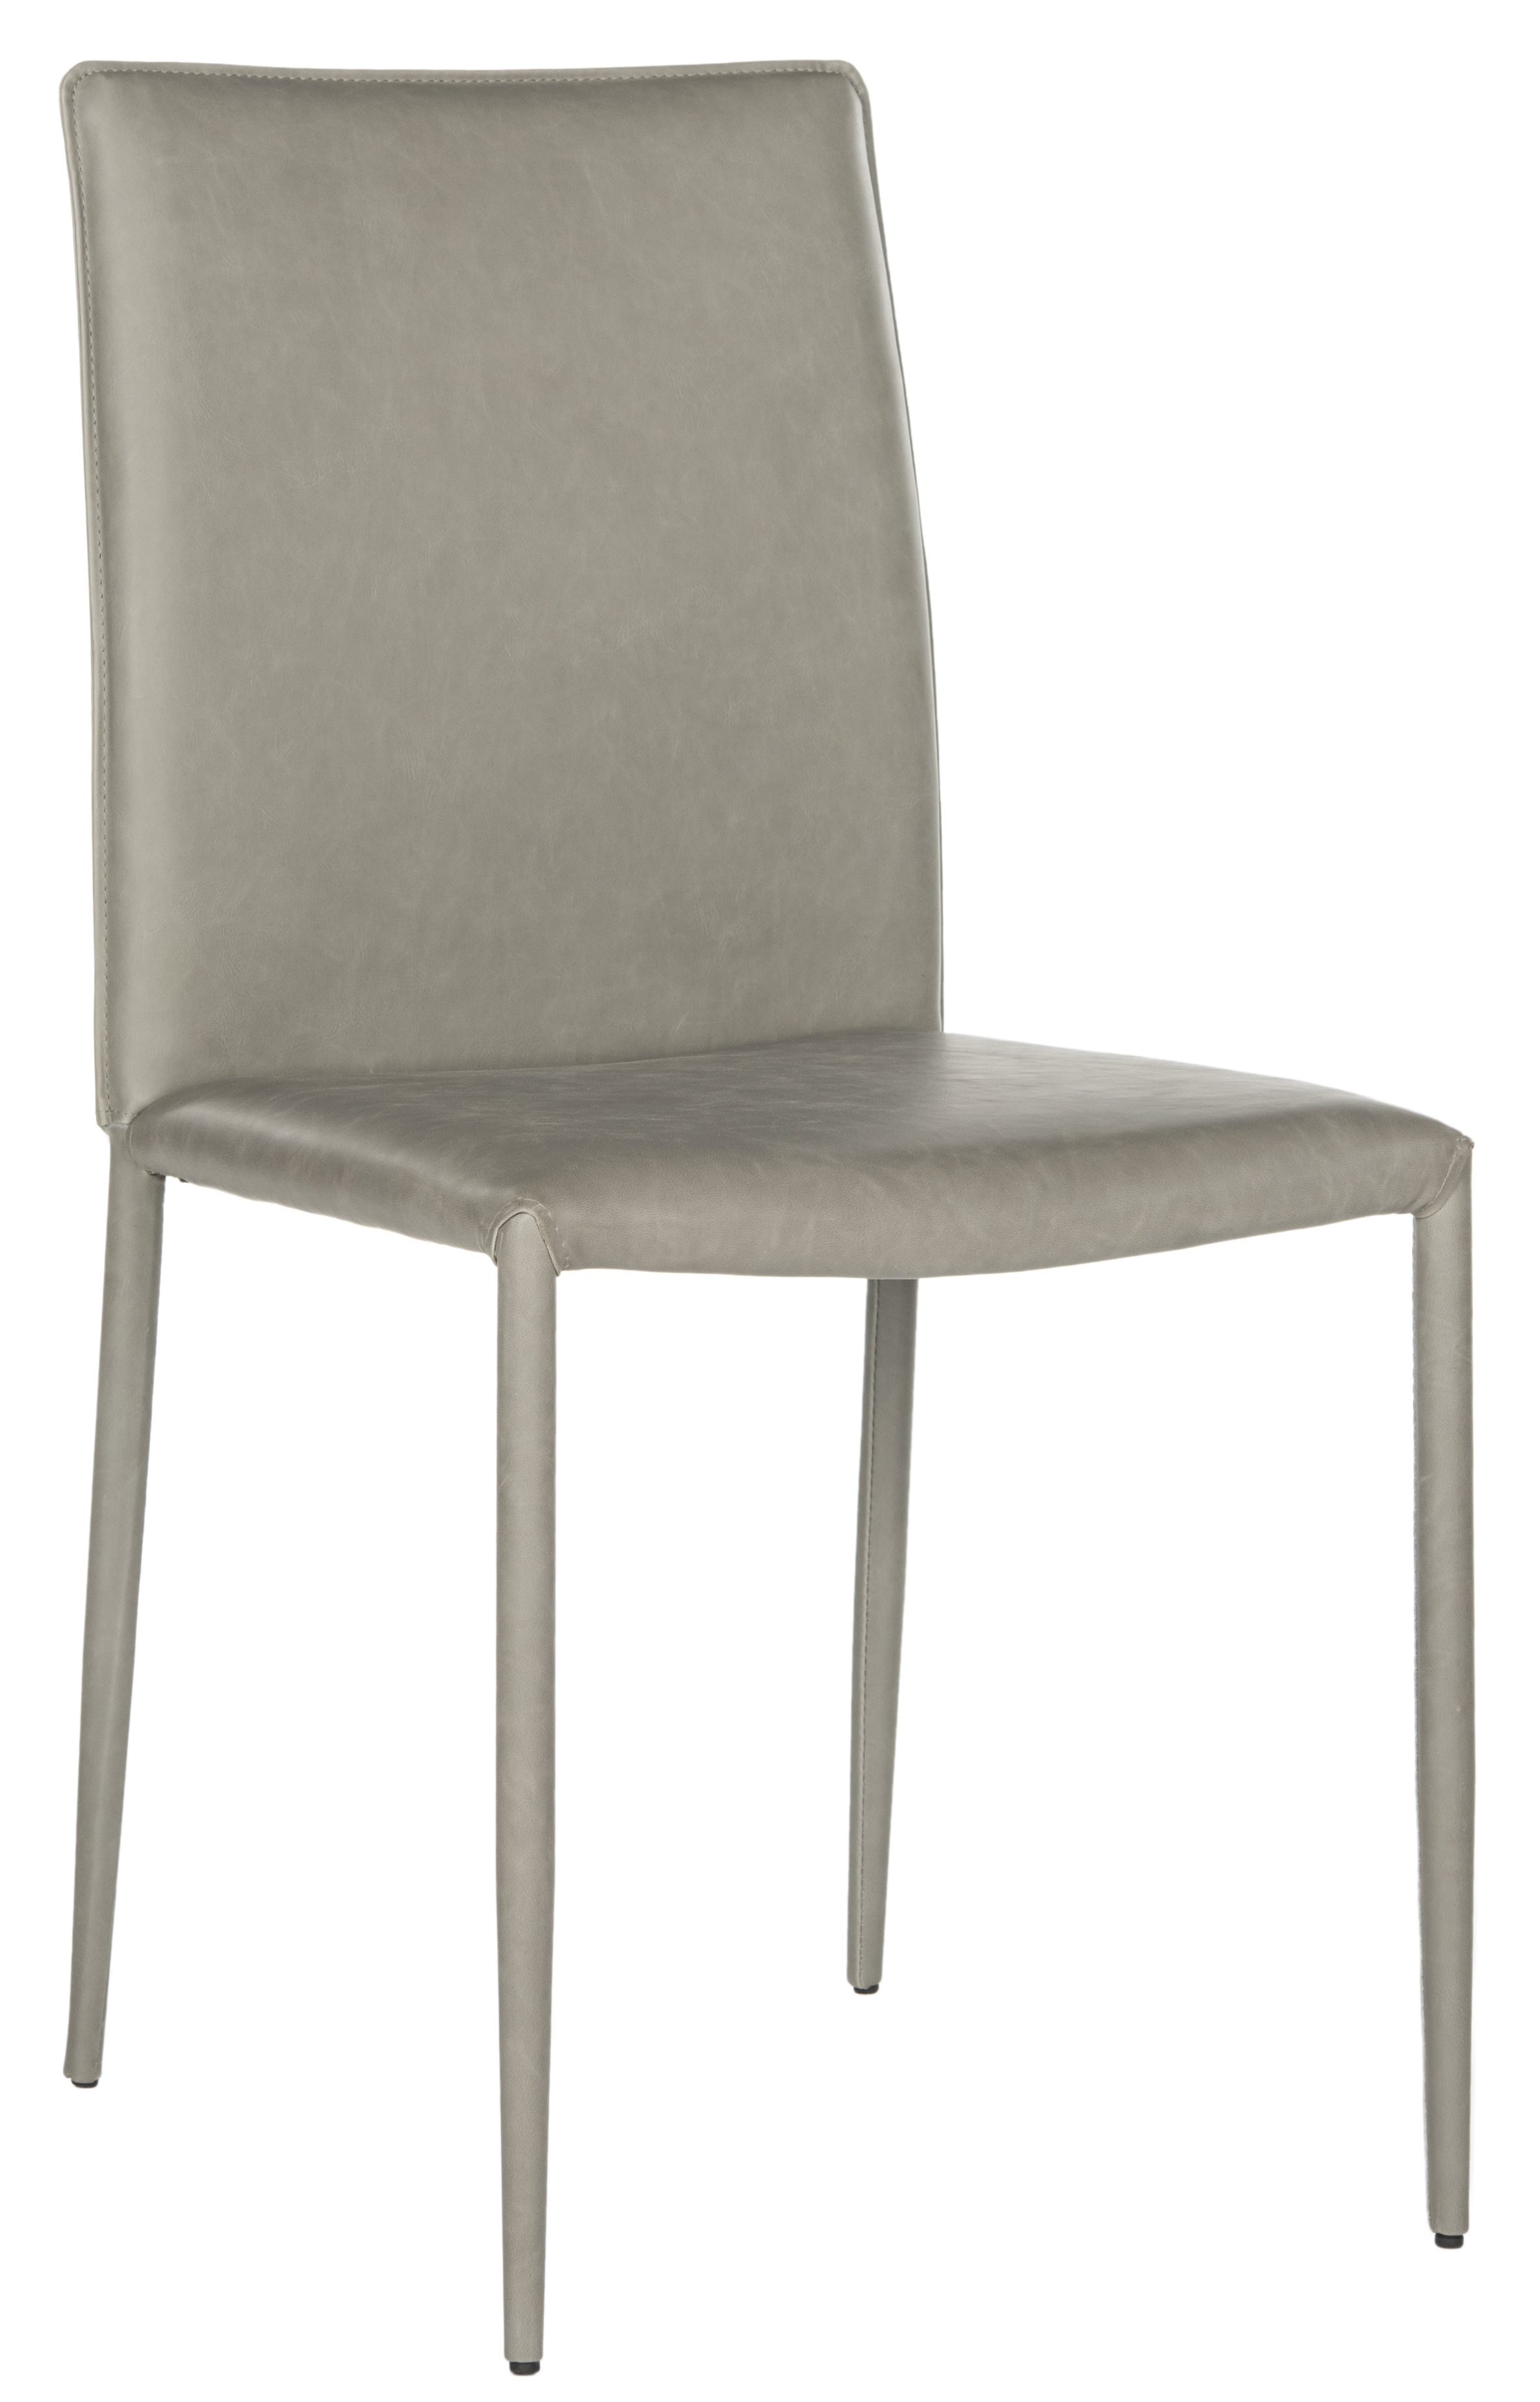 Karna 19''H Dining Chair - Antique Grey - Arlo Home - Image 1